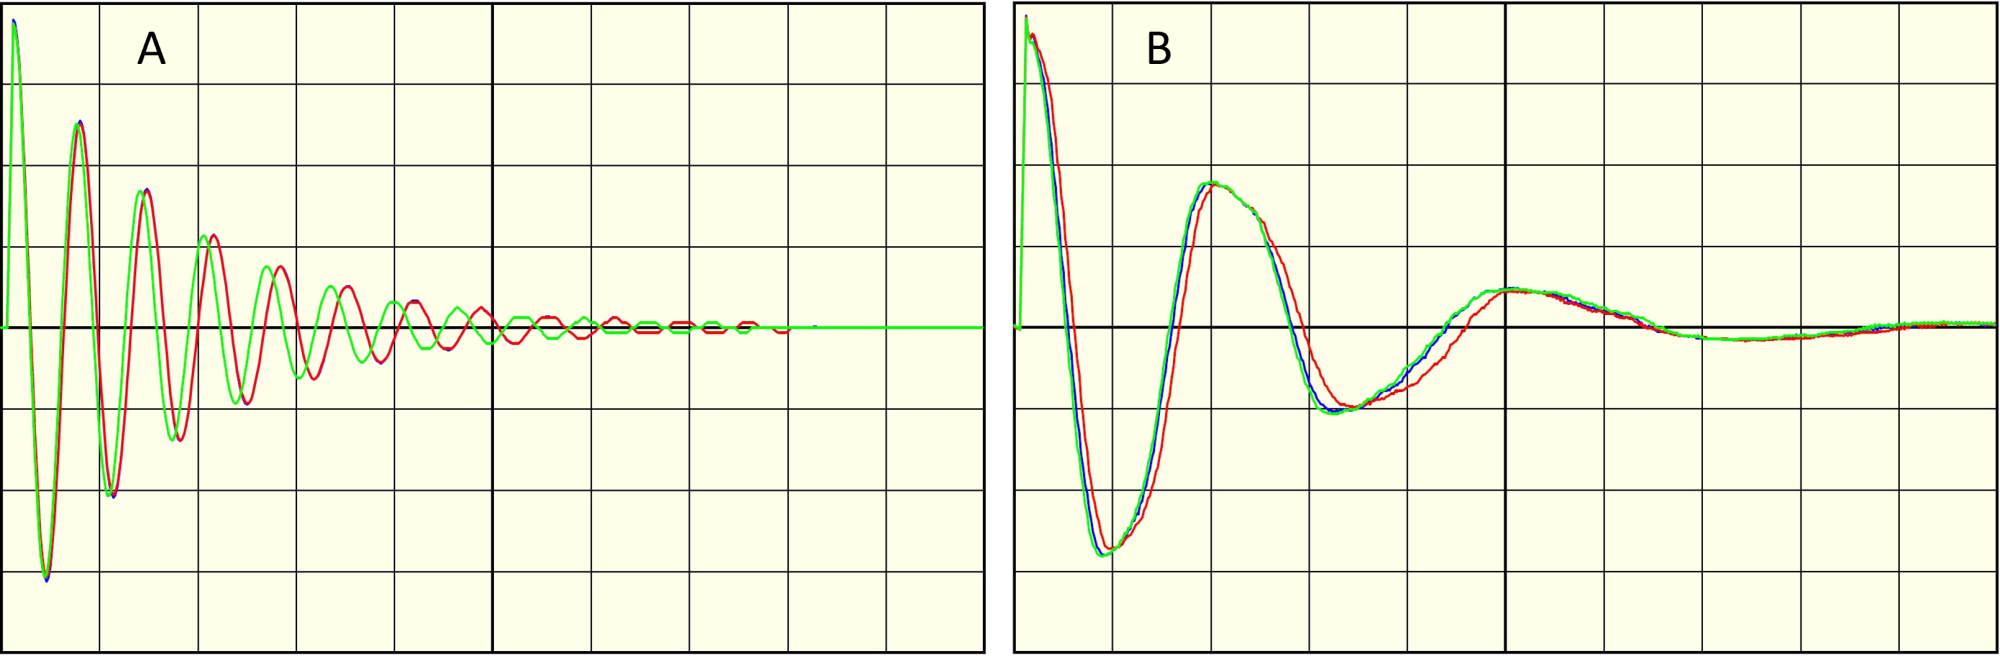 IMAGE 1: A winding with fewer turns will produce a higher frequency waveform (A) than a winding with more turns (B). An assembled motor will typically have a lower wave frequency and be more dampened than the motor stator alone. (Images courtesy of Electrom)